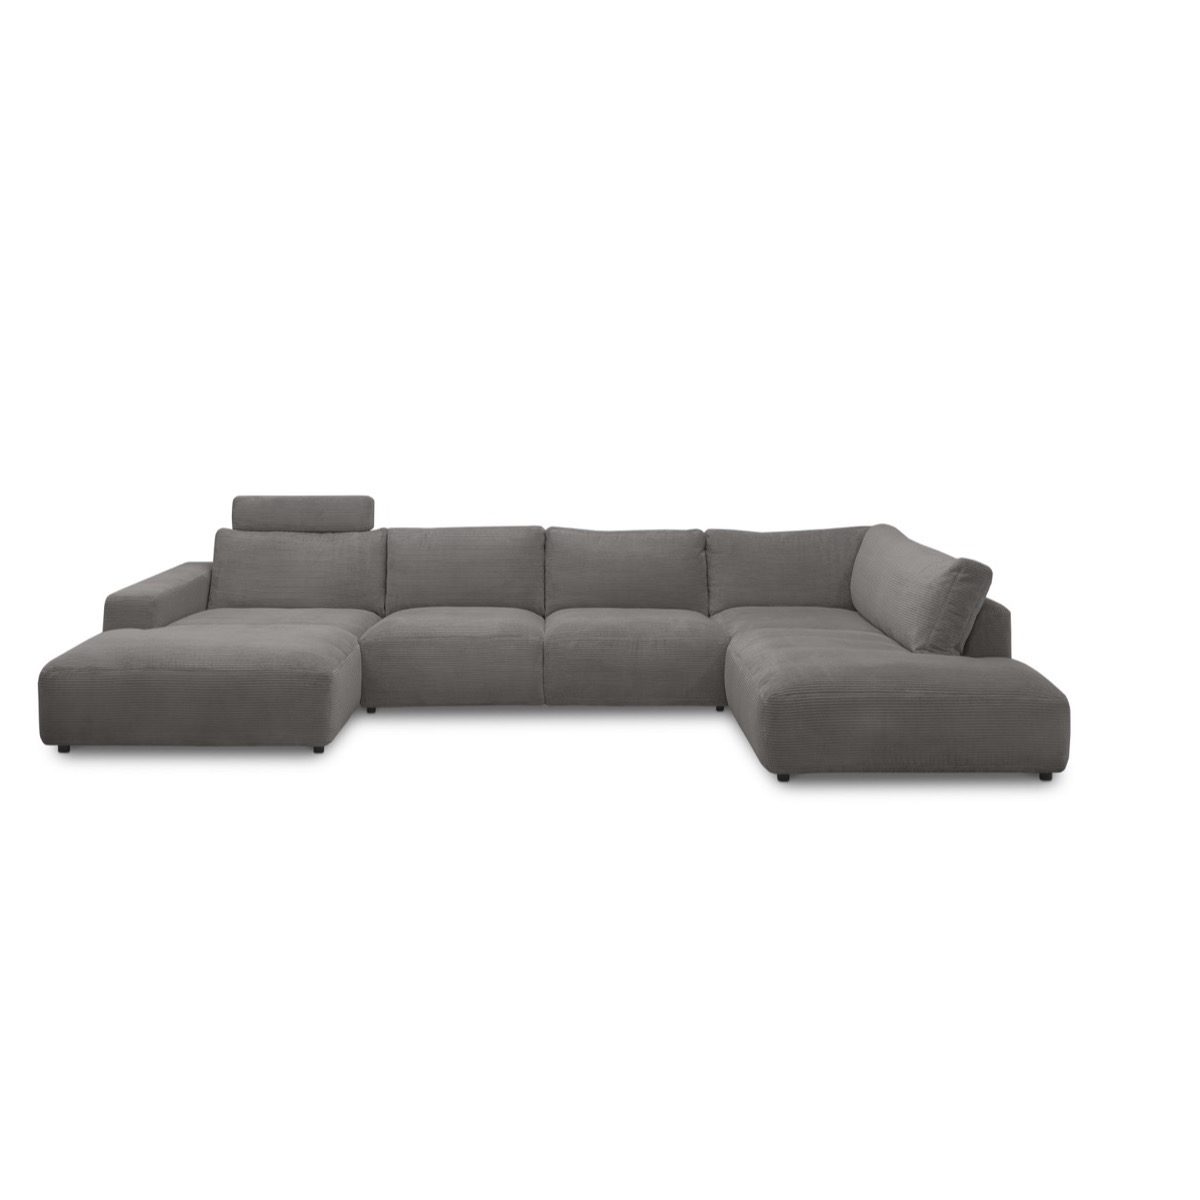 Gallery M branded by Musterring Lucia Wohnlandschaft Cord | Alle Sofas